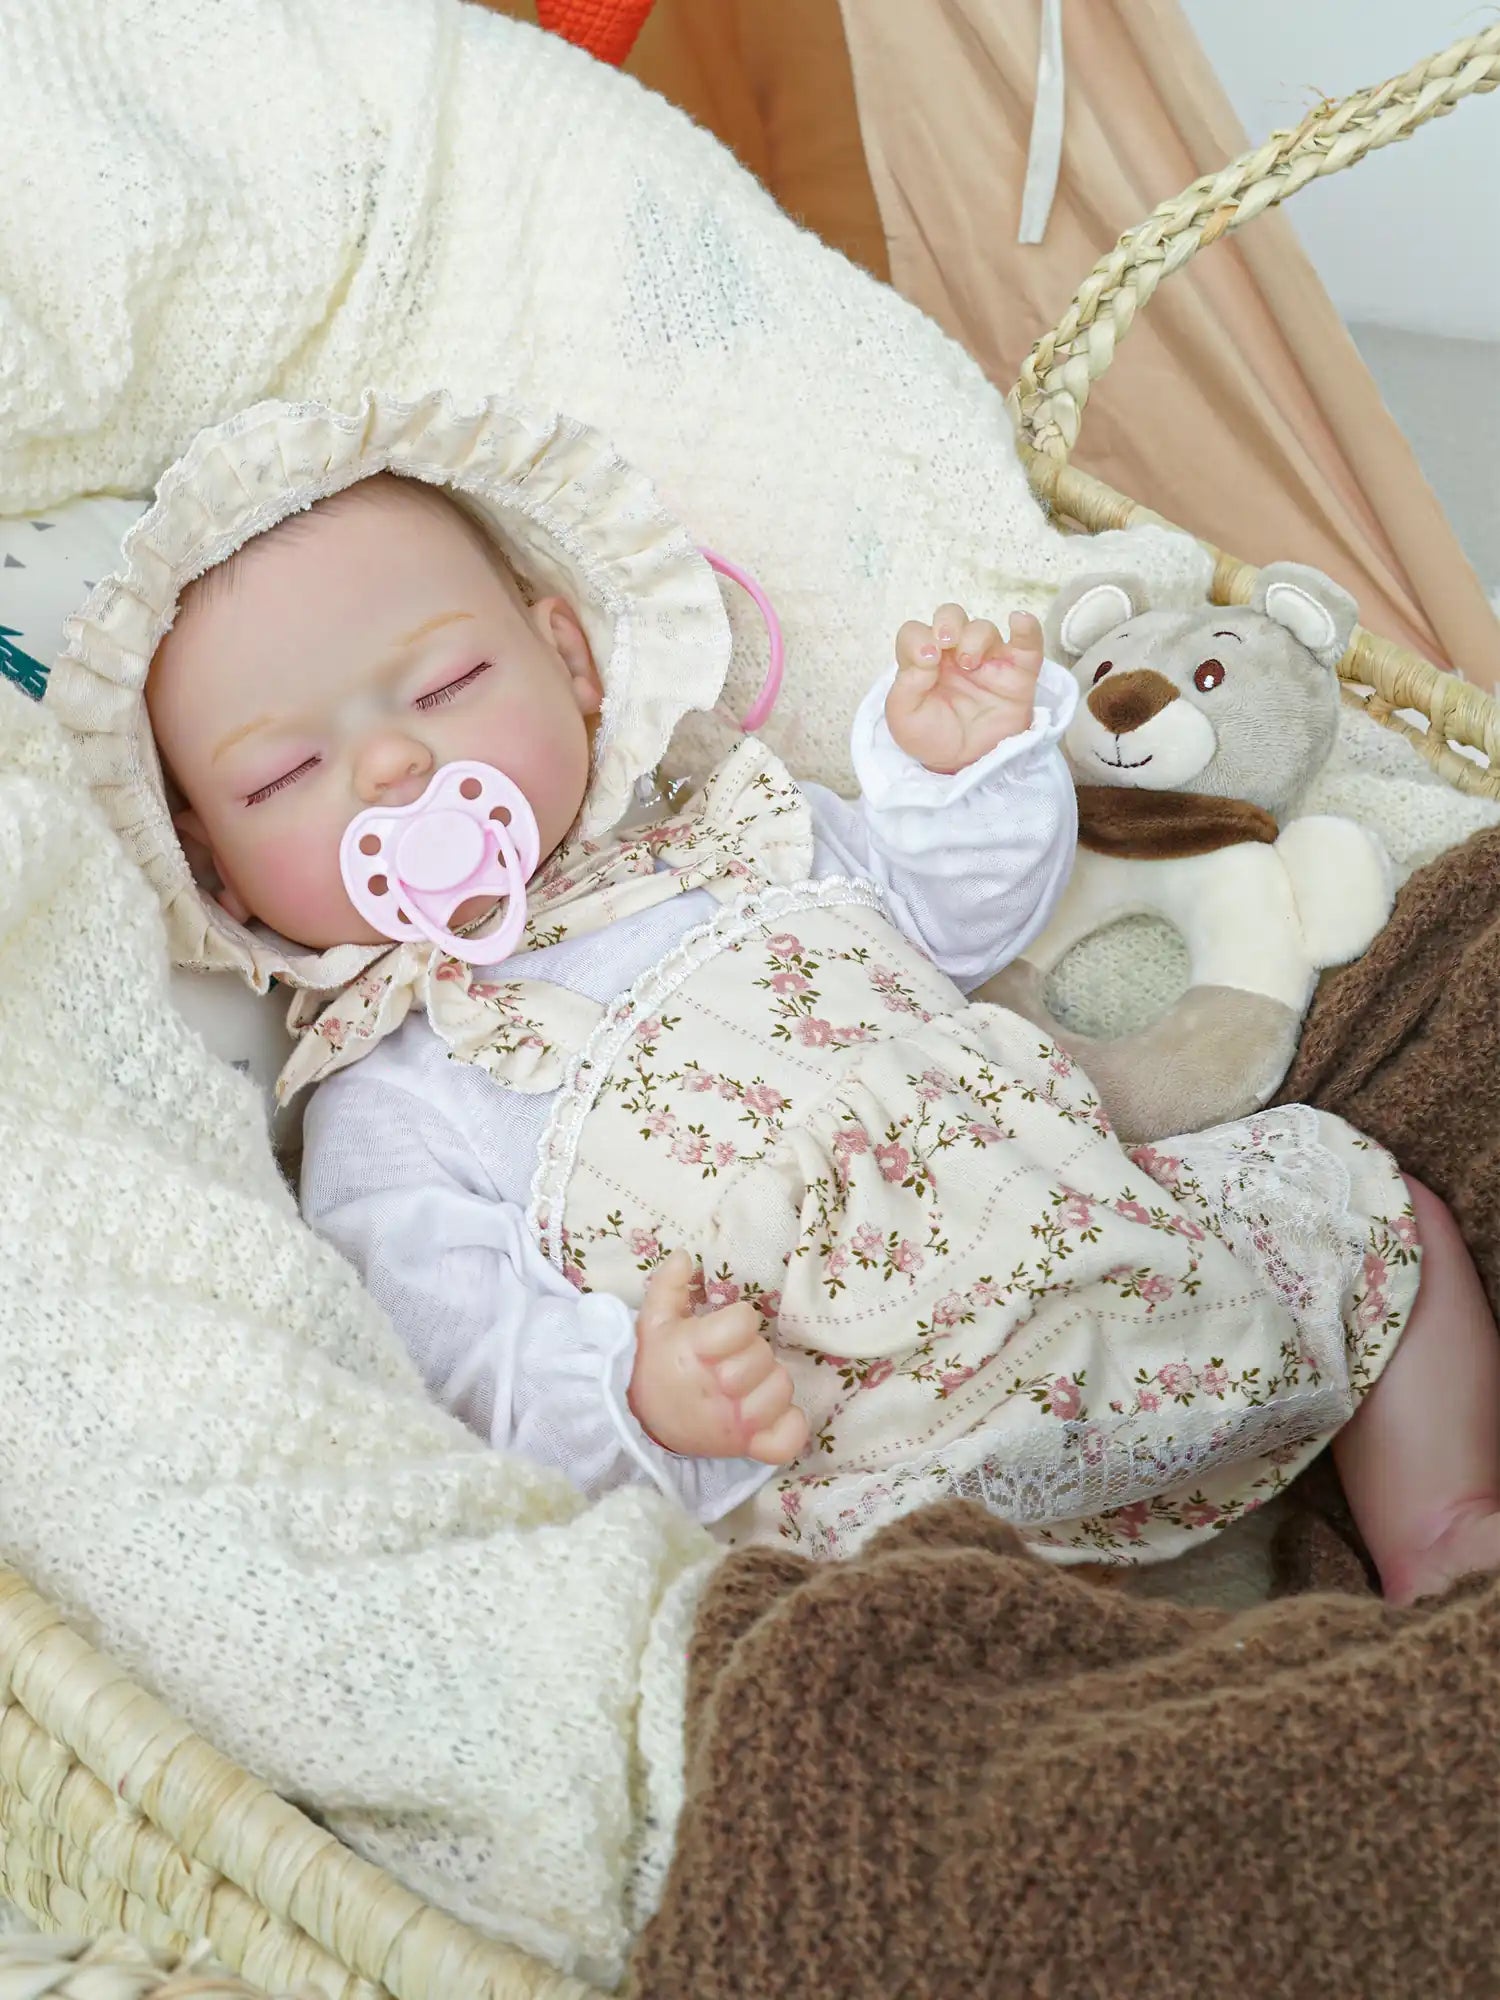 A serene reborn baby doll wearing a floral bonnet and dress, sleeping in a woven basket with a pink pacifier in its mouth, flanked by a soft, knitted blanket and a plush teddy bear.